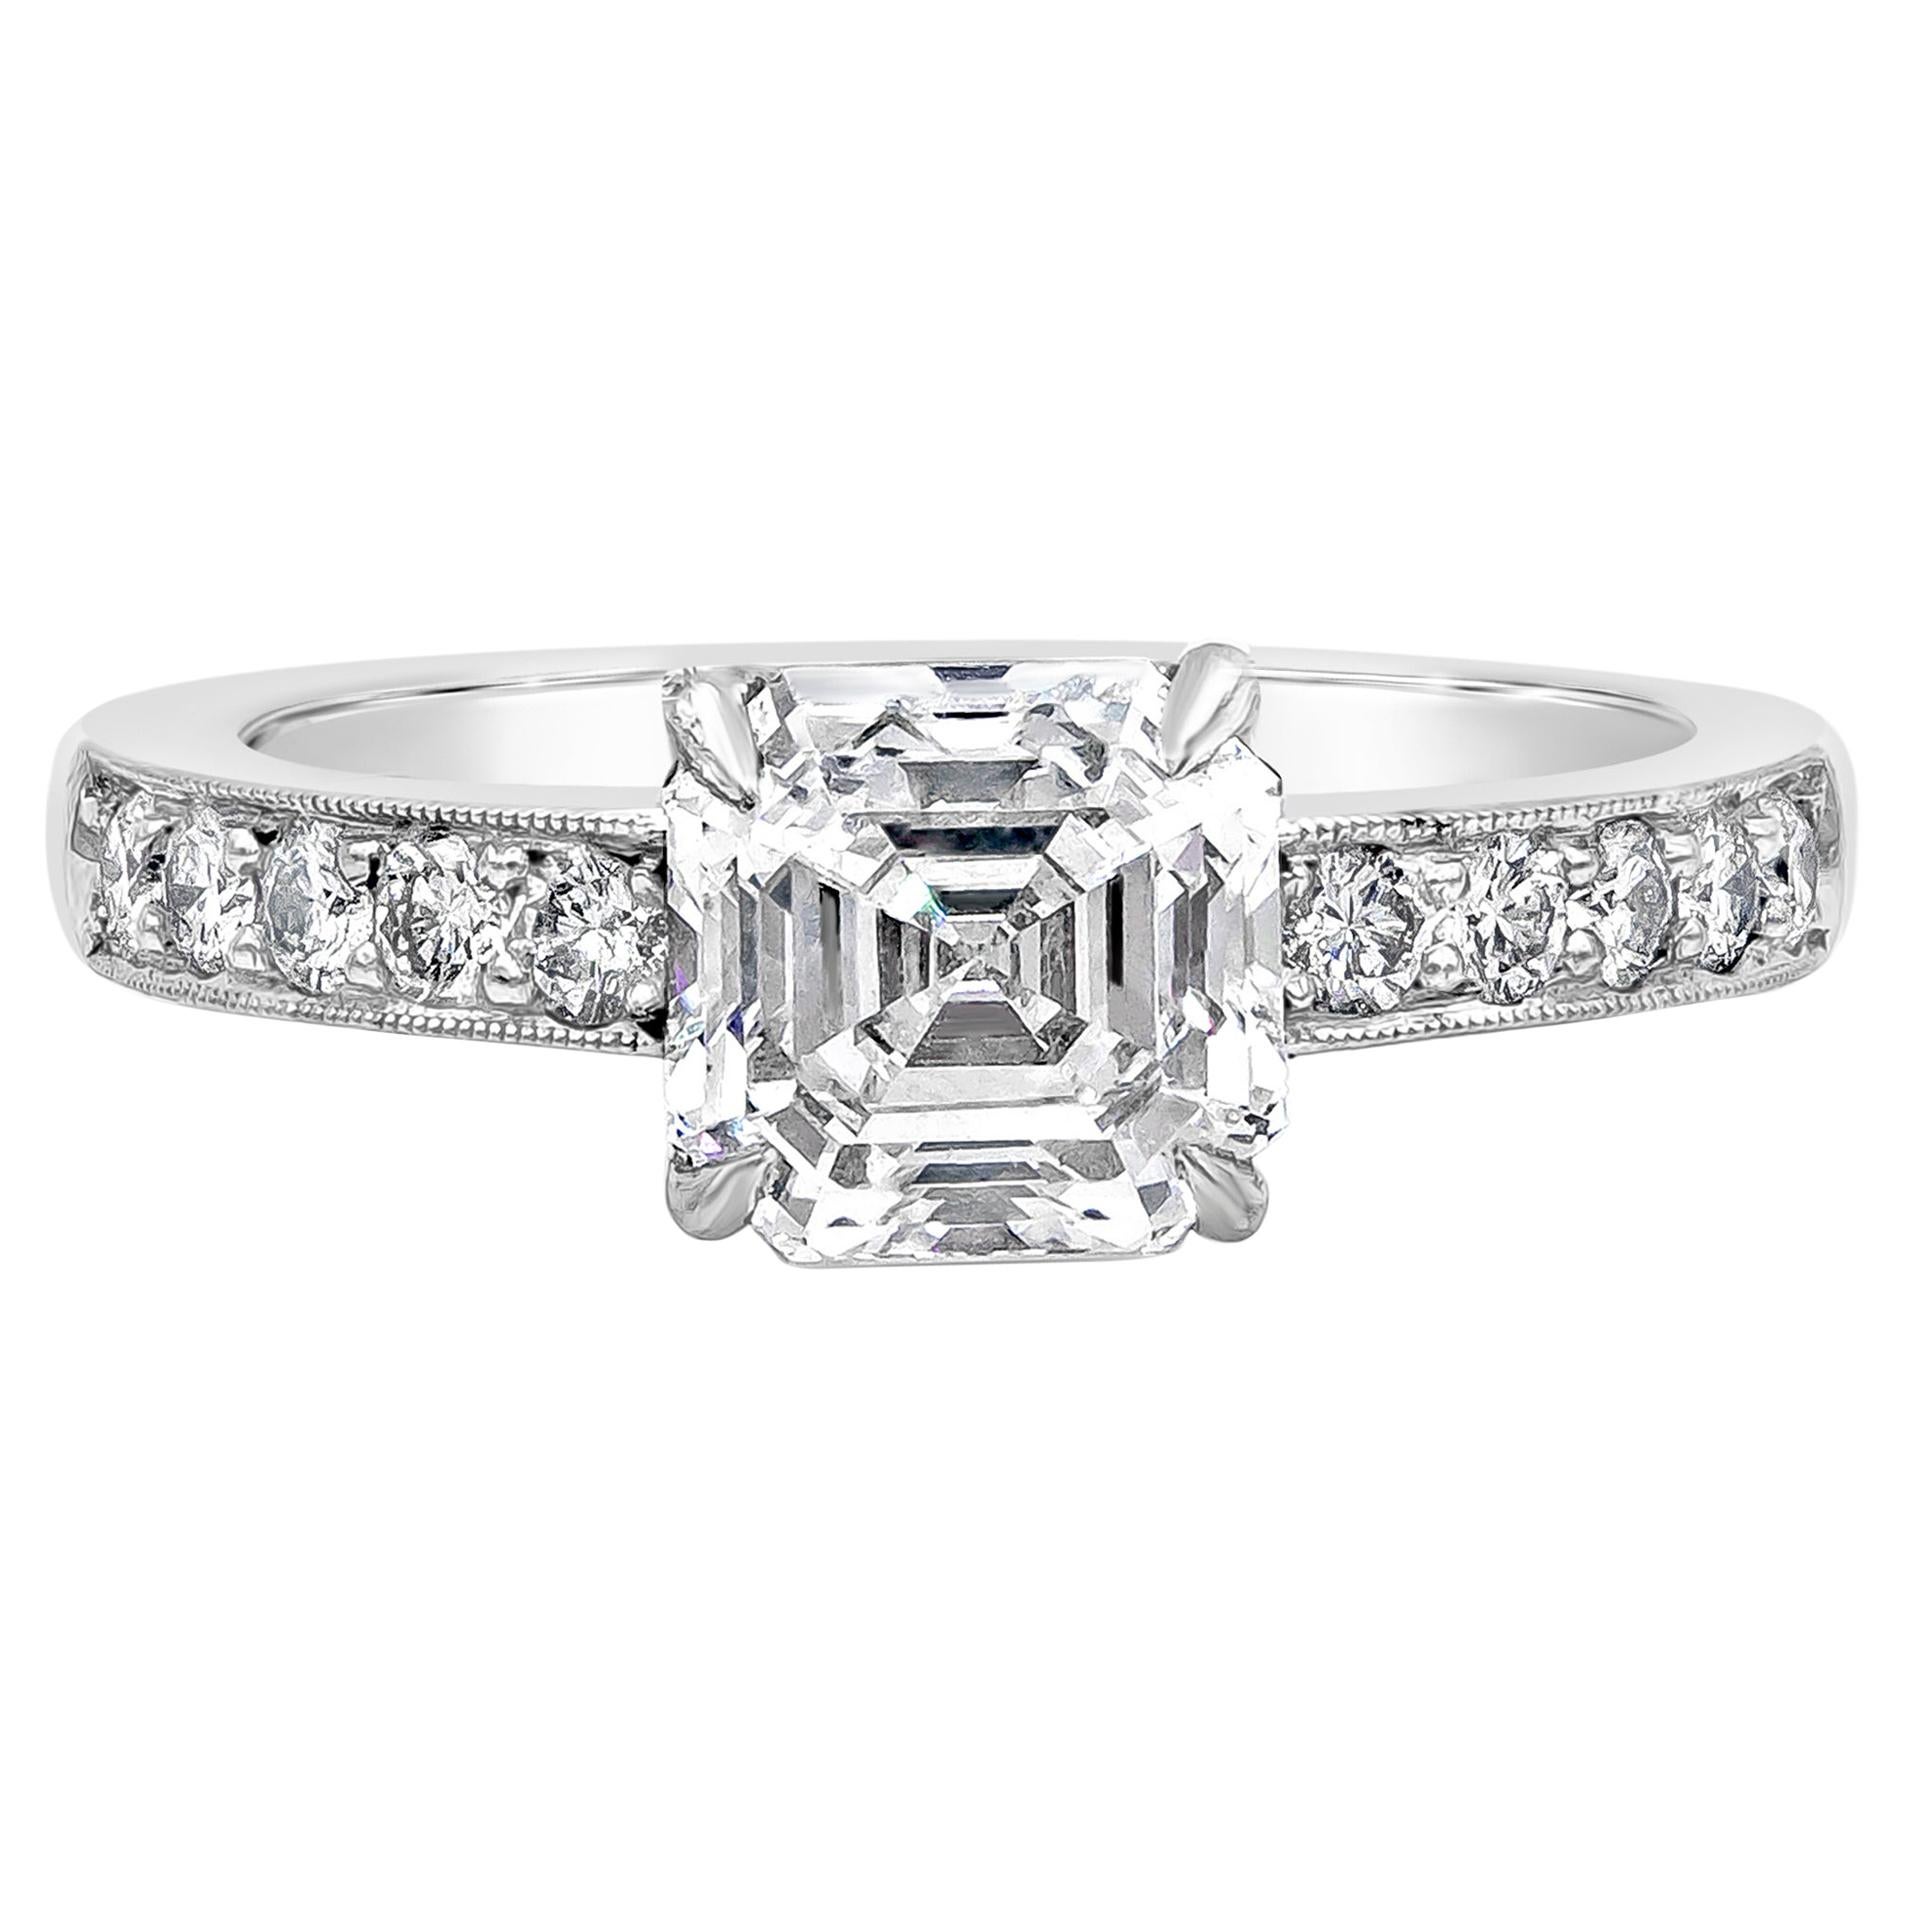 GIA Certified 1.58 Carats Asscher Cut Diamond Channel-Set Pave Engagement Ring 